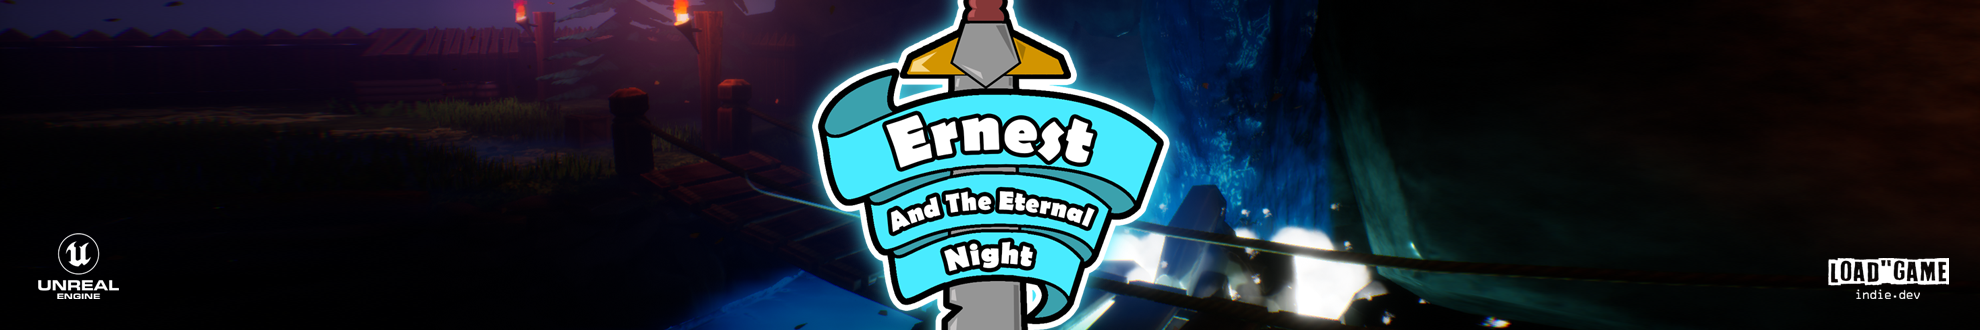 Ernest and the eternal night